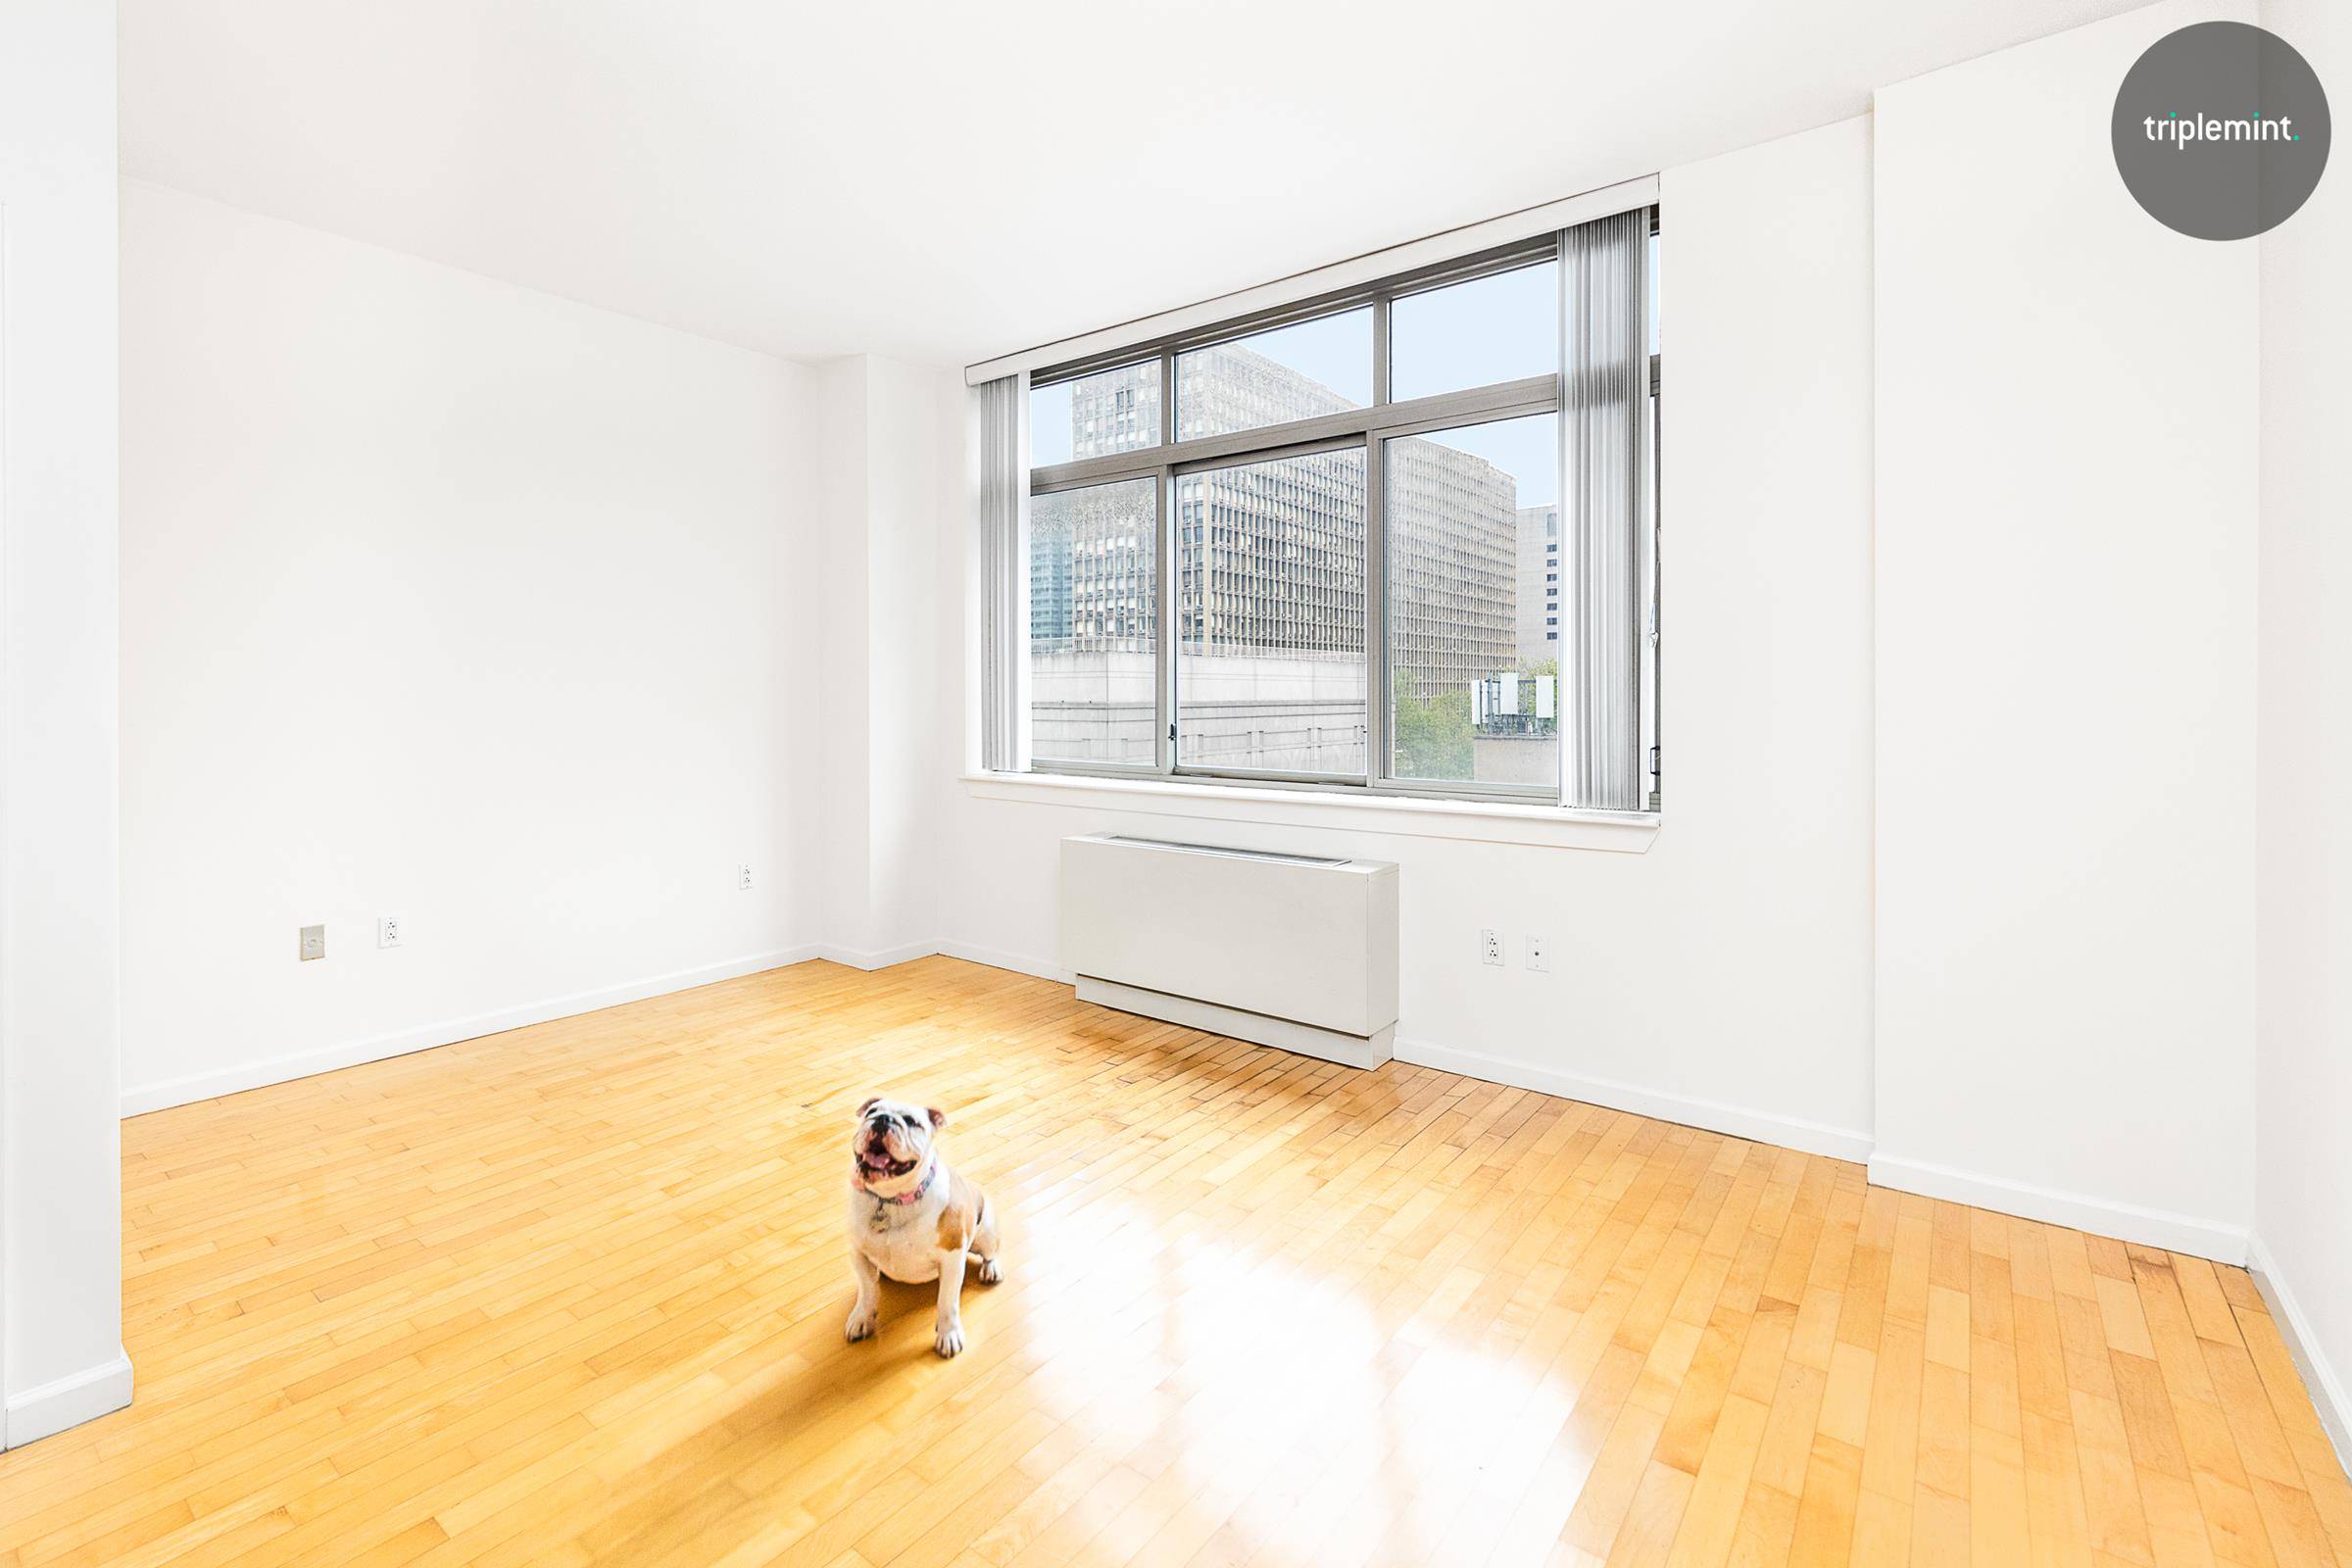 This is an extraordinary deal for a dog friendly, condo studio on the border of Murray Hill and Kips Bay in a full service, luxury building.